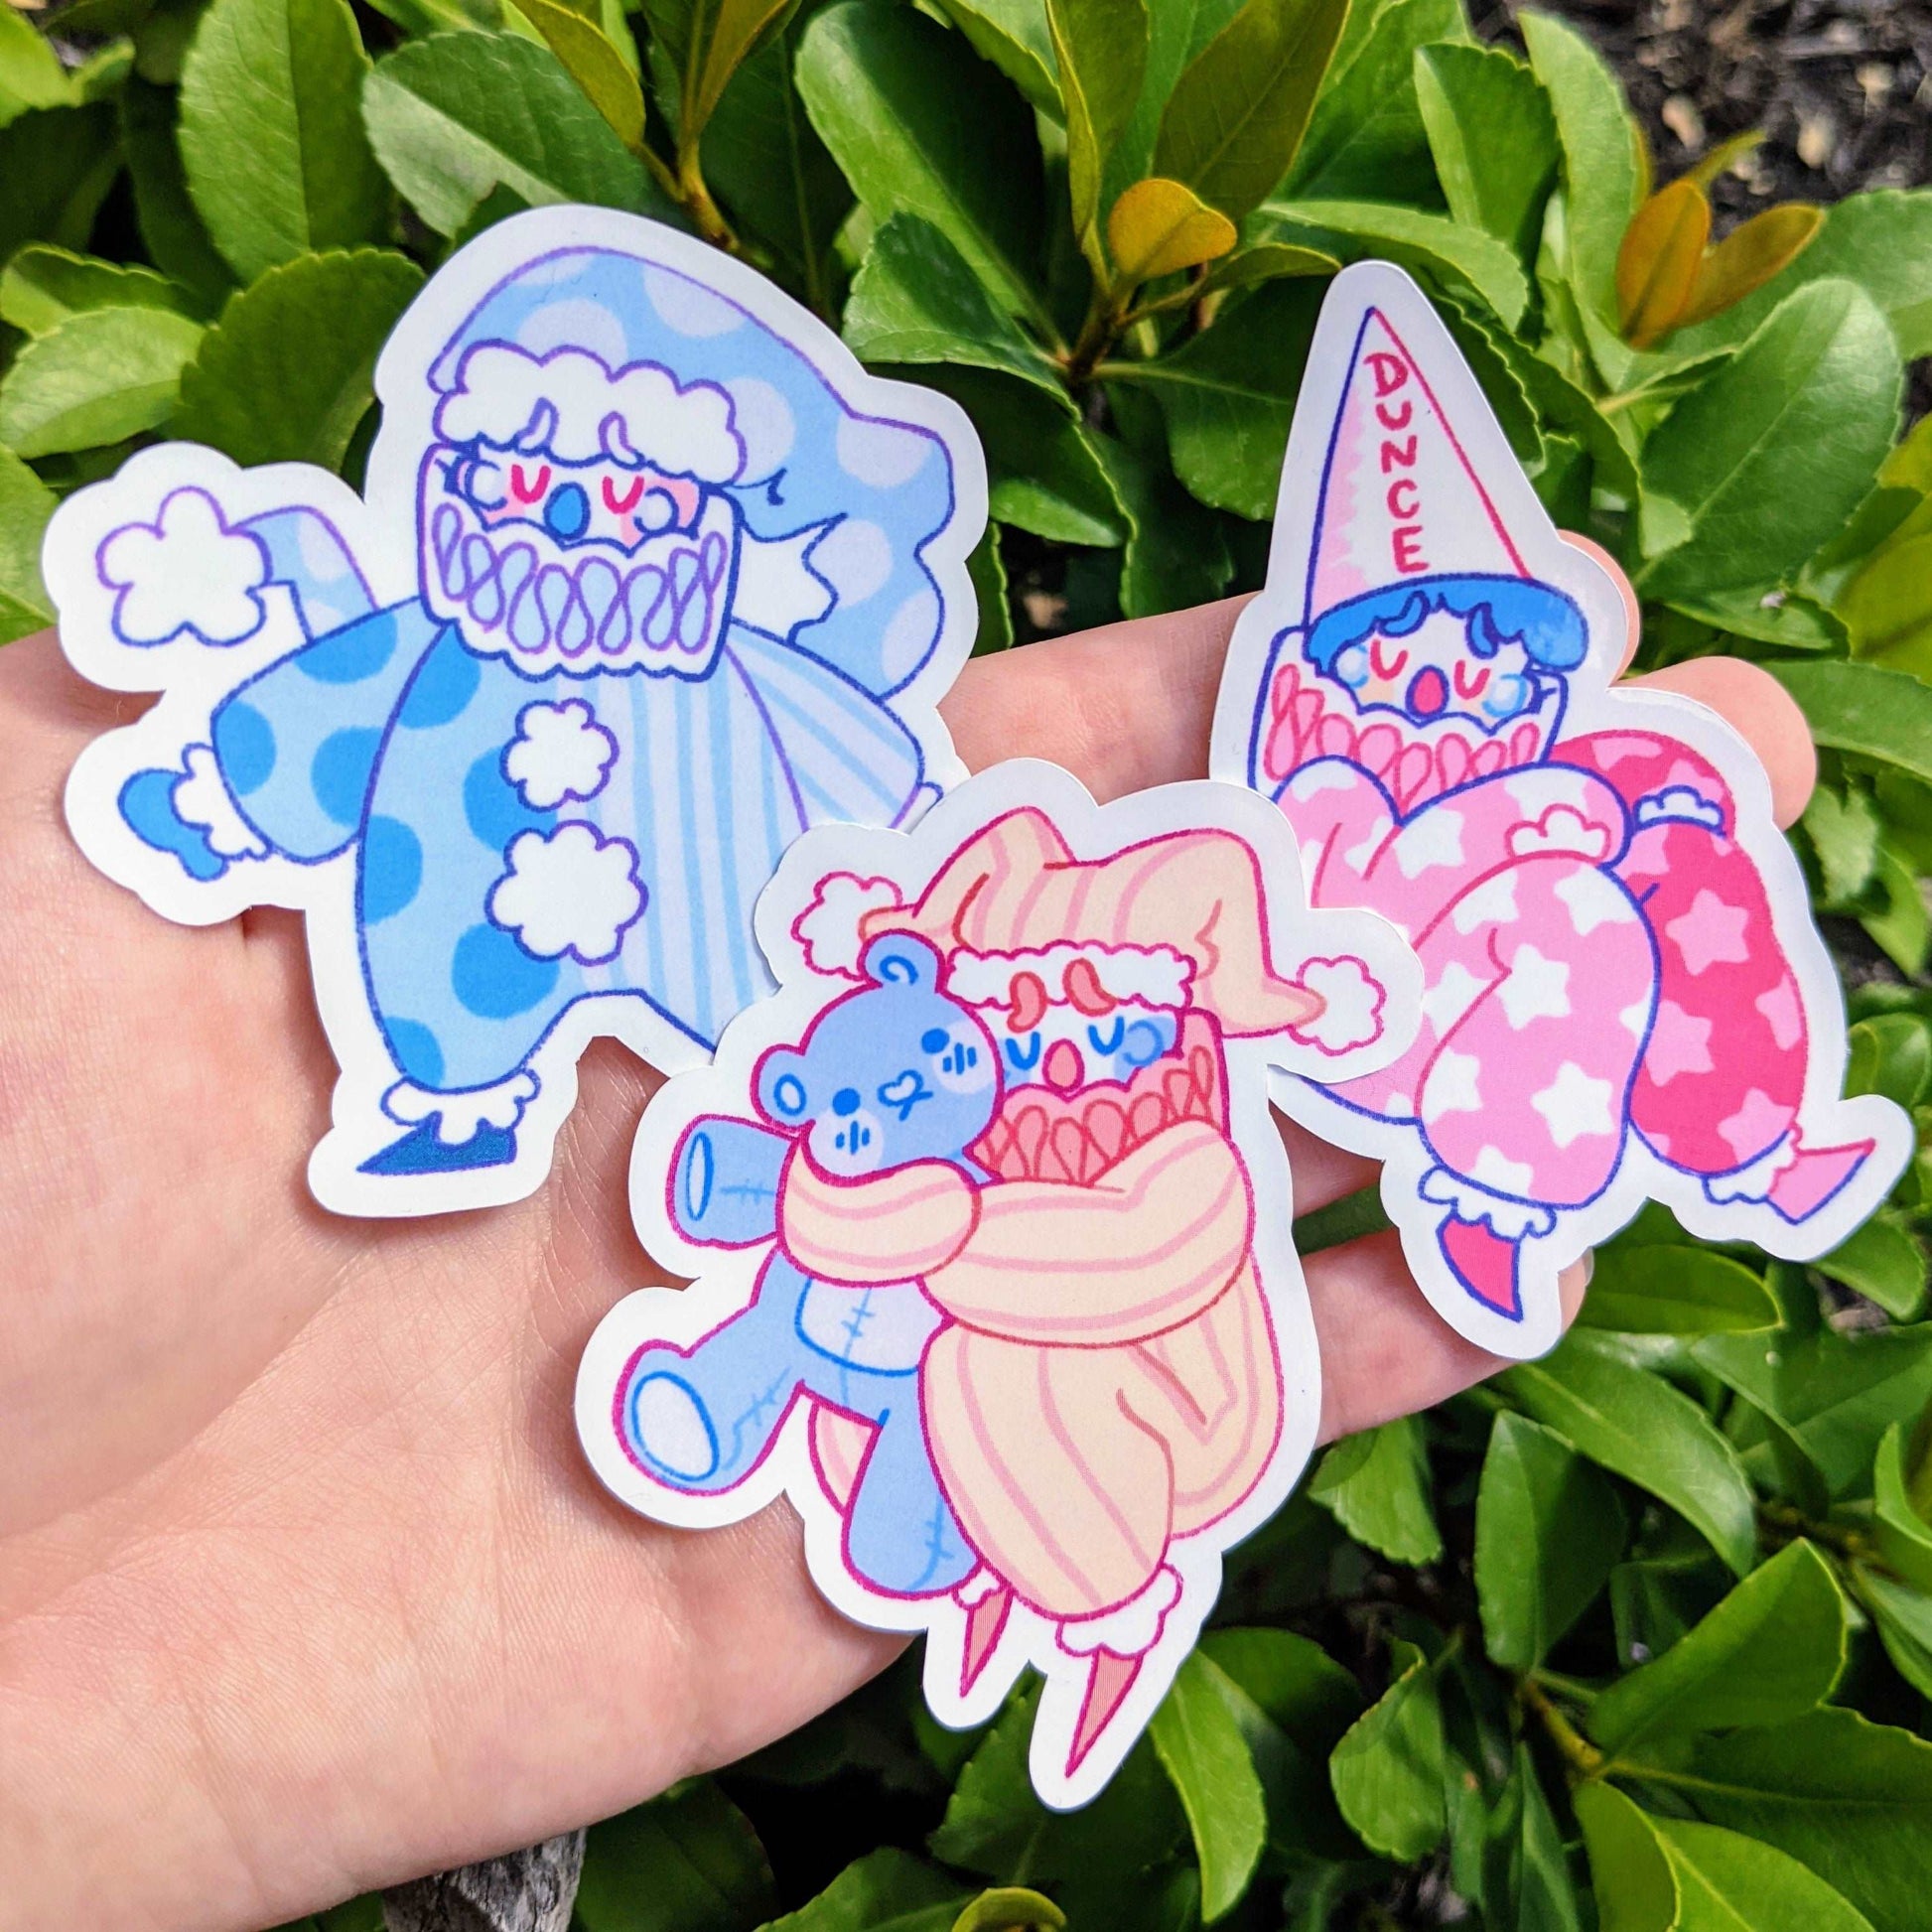 Holographic Stickers, Zap! Creatives